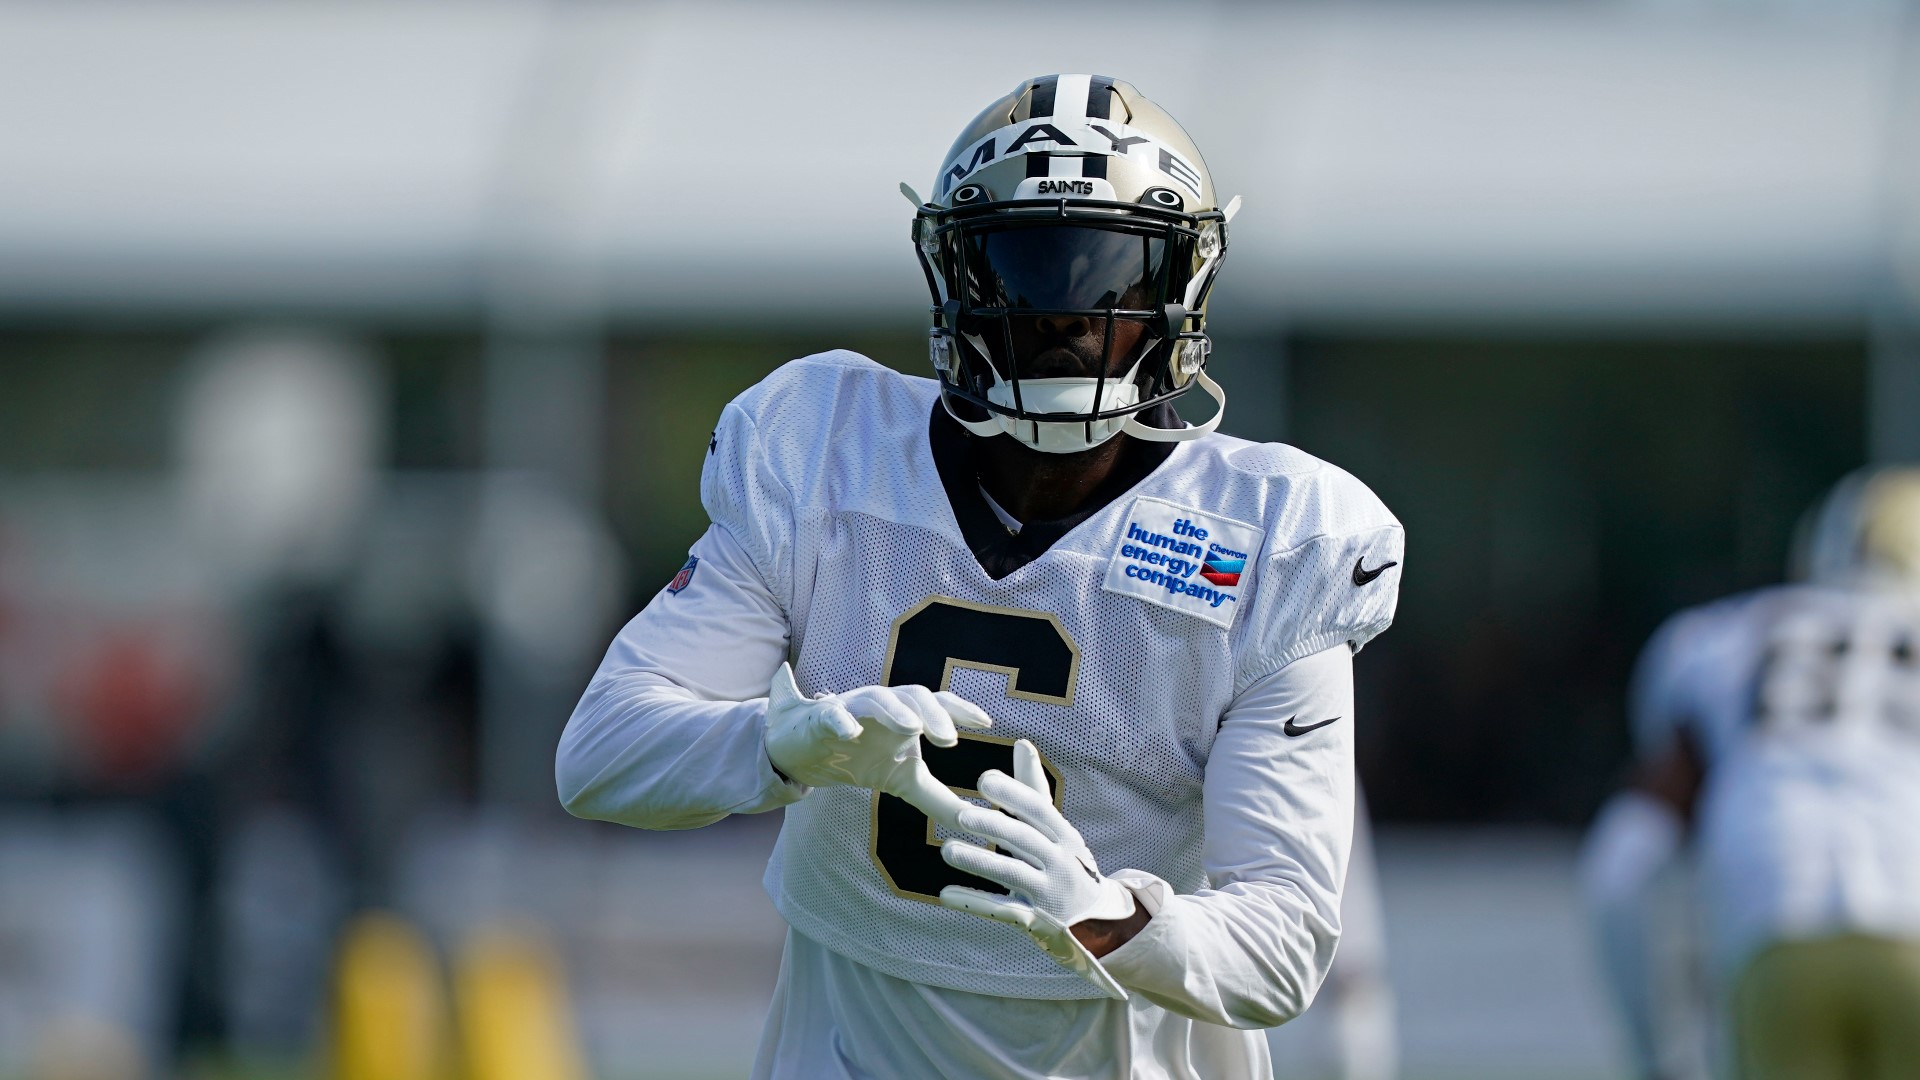 New Orleans Saints safety Marcus Maye has been arrested on counts of aggravated assault with a firearm.